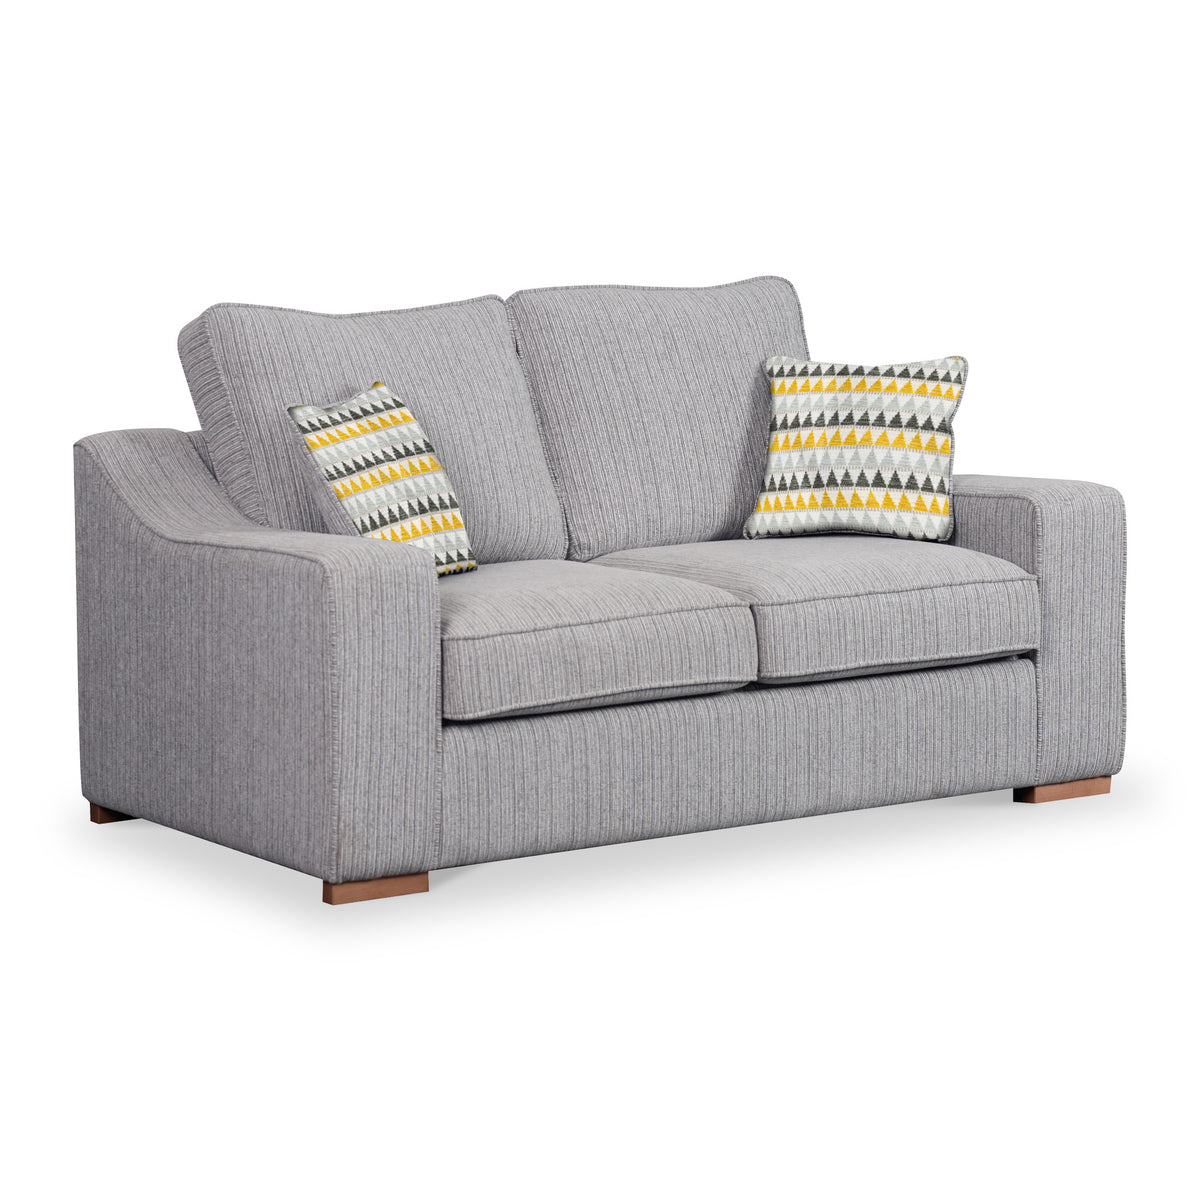 Ashow Silver 2 Seater Sofabed with Mustard Dusk Scatter Cushions from Roseland Furniture